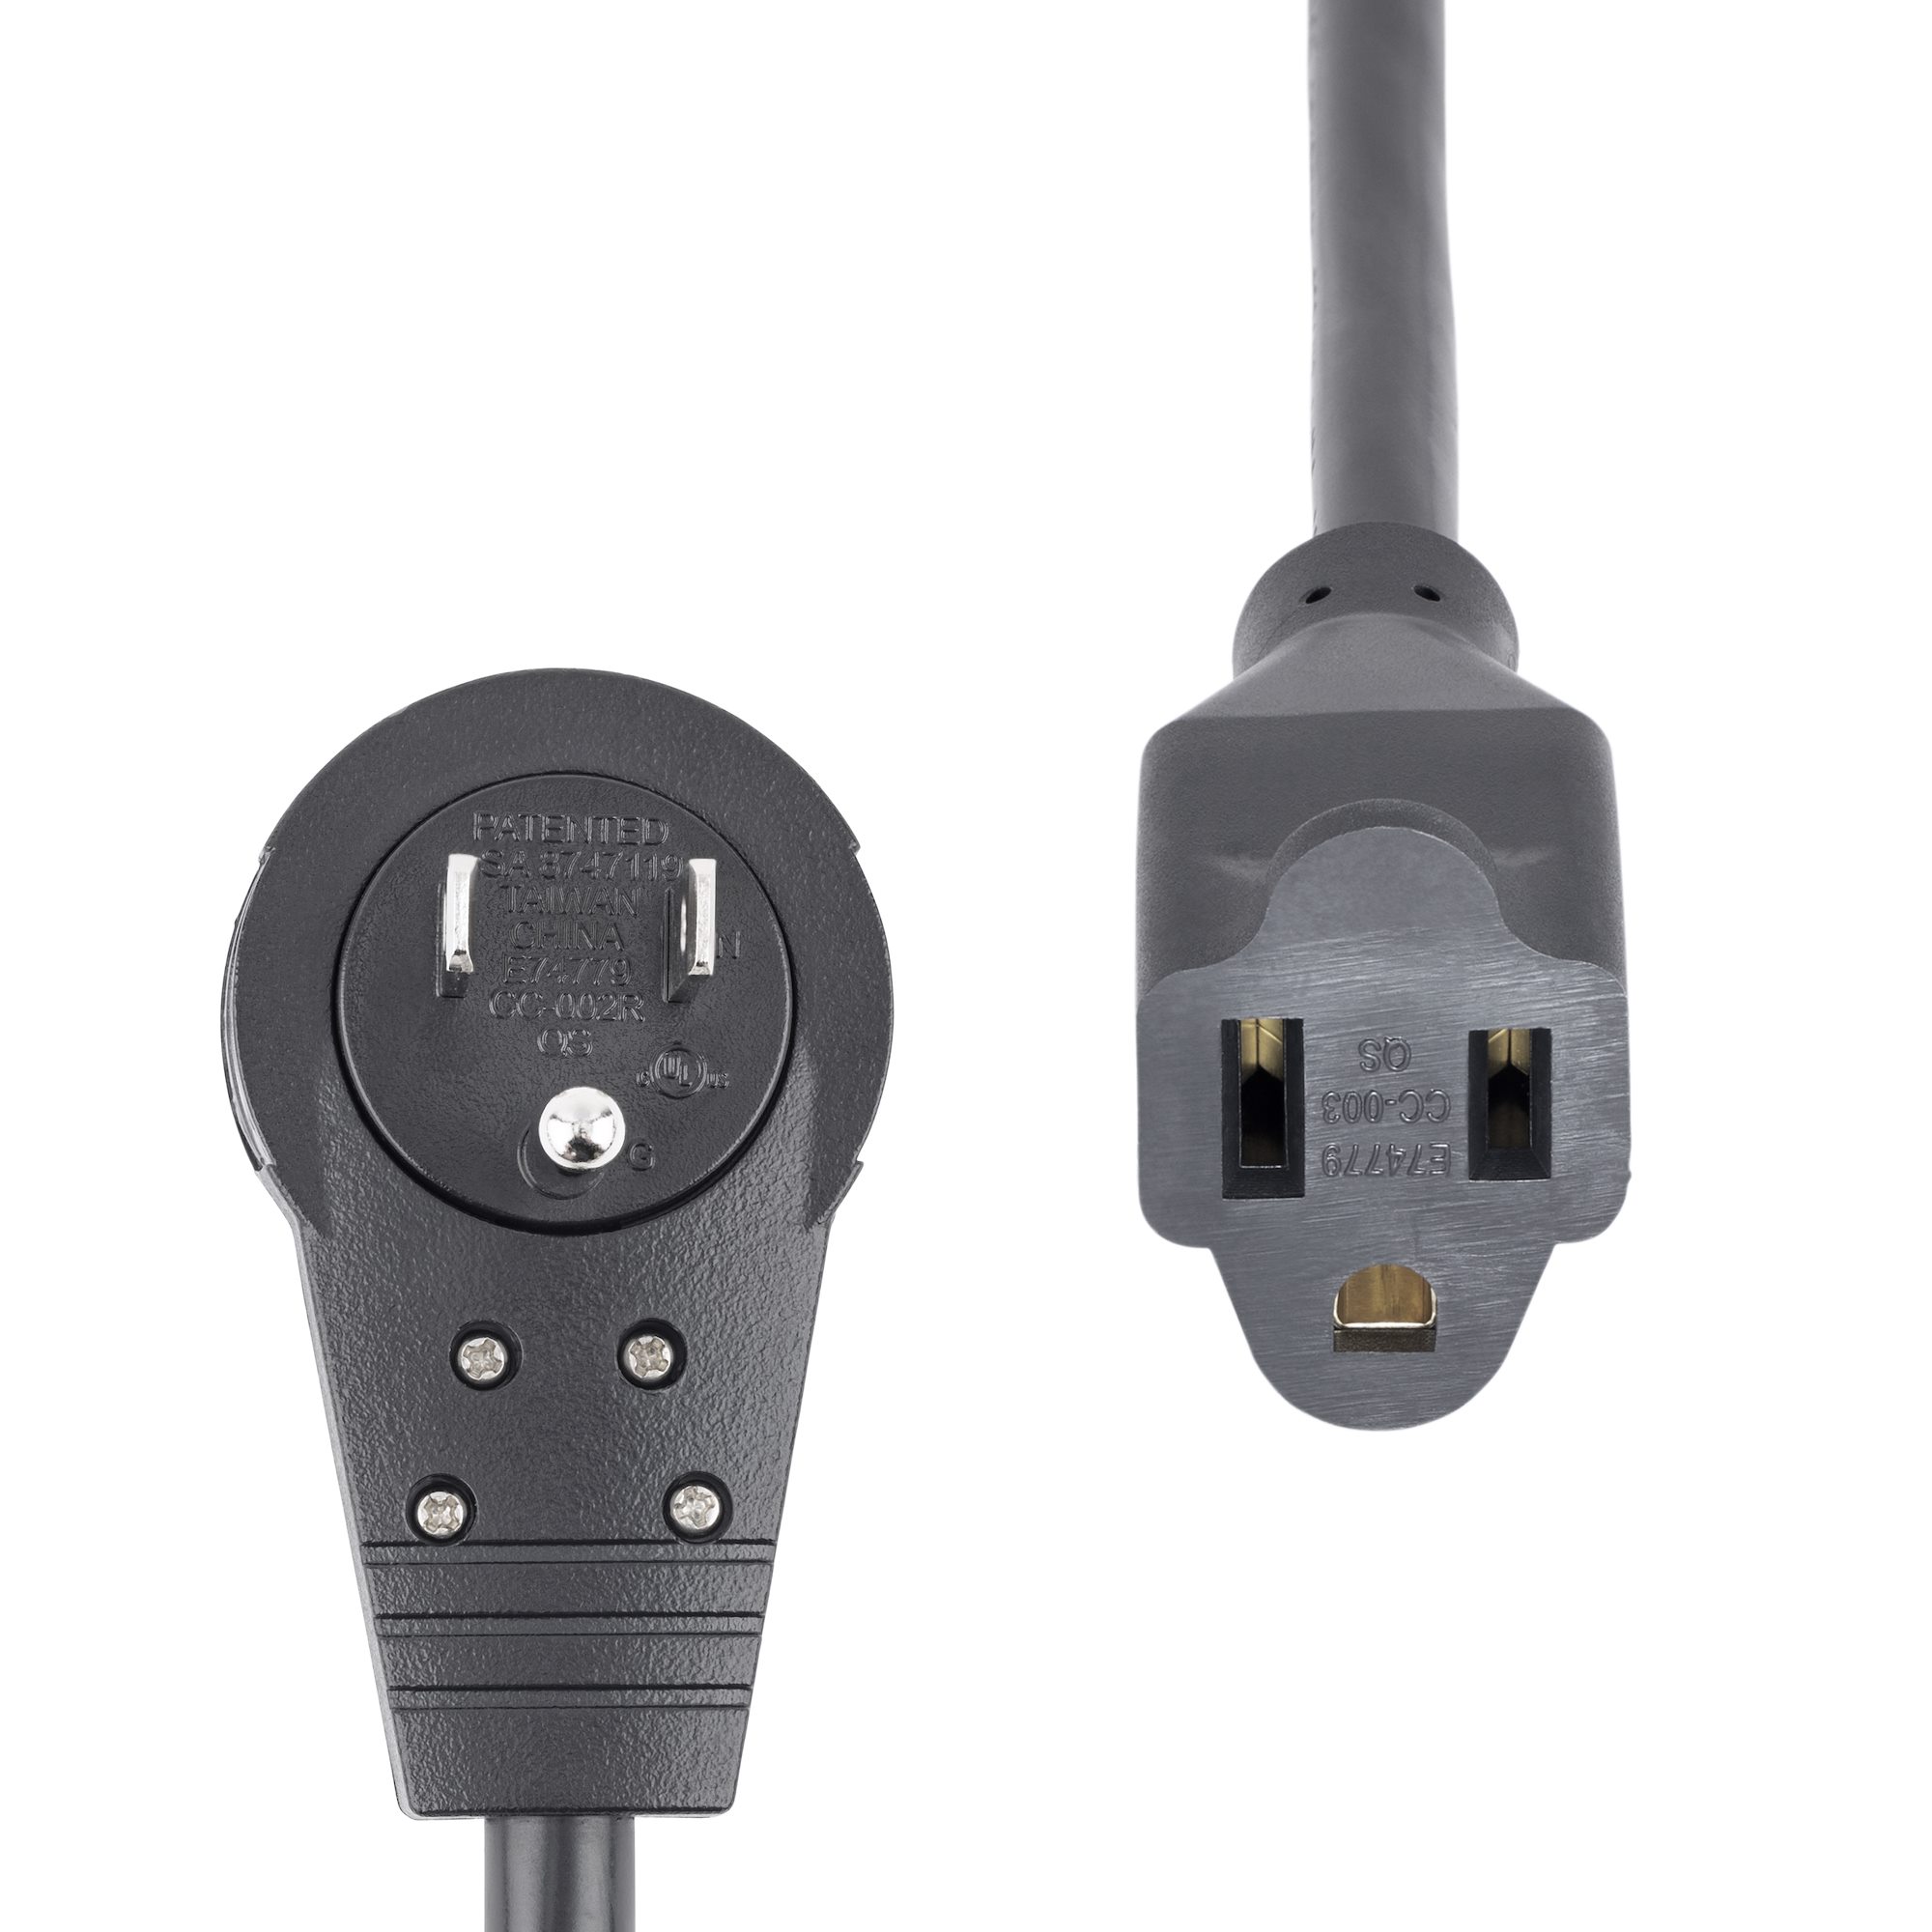 6ft Power Extension Cord - Rotating Plug - Computer Power Cables